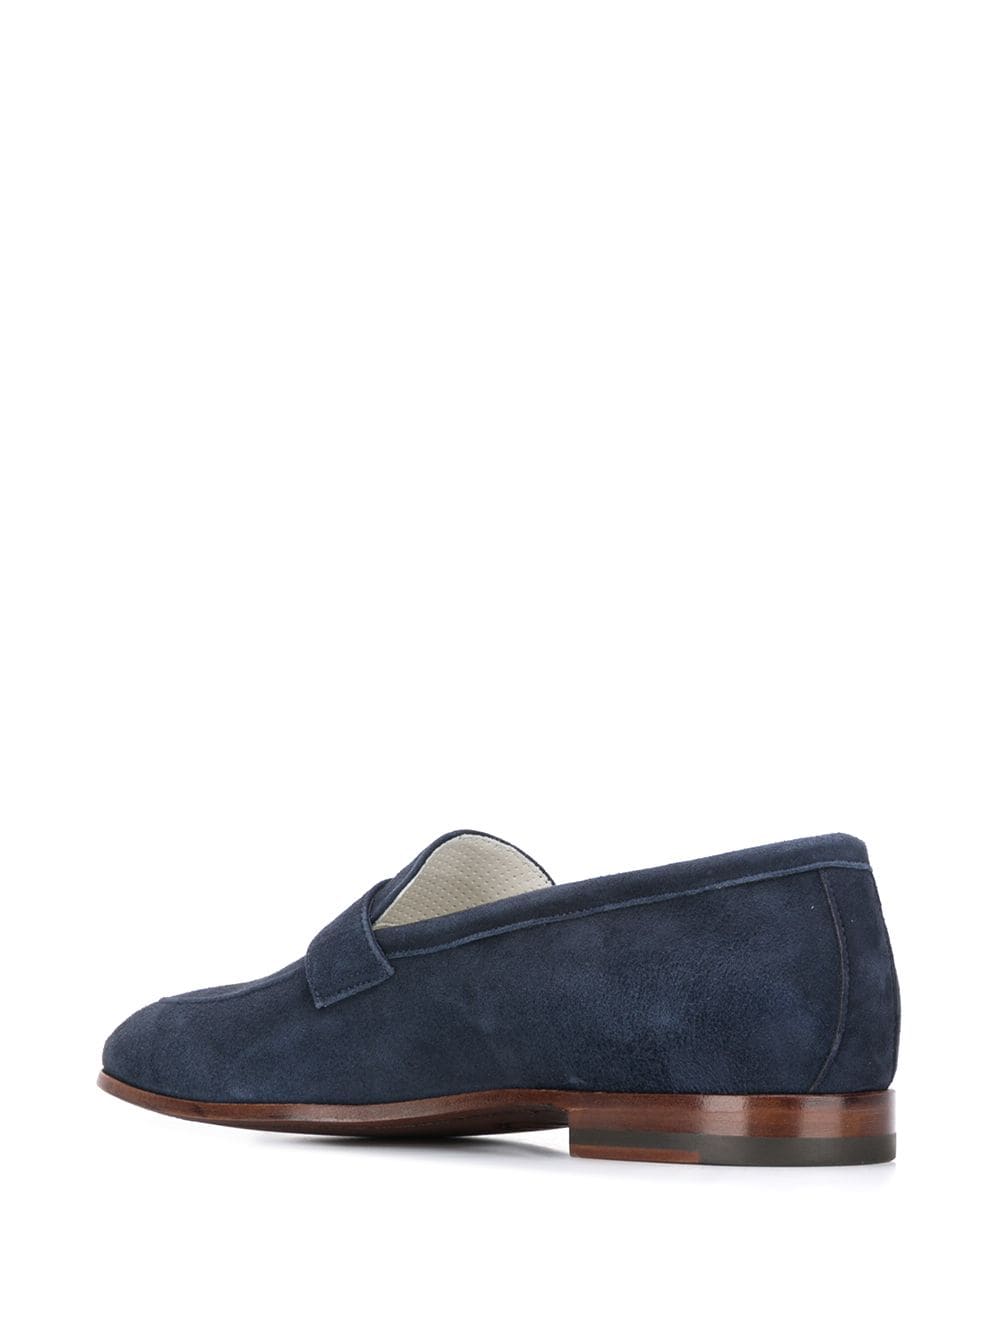 Shop Scarosso slip-on Marzio loafers with Express Delivery - FARFETCH